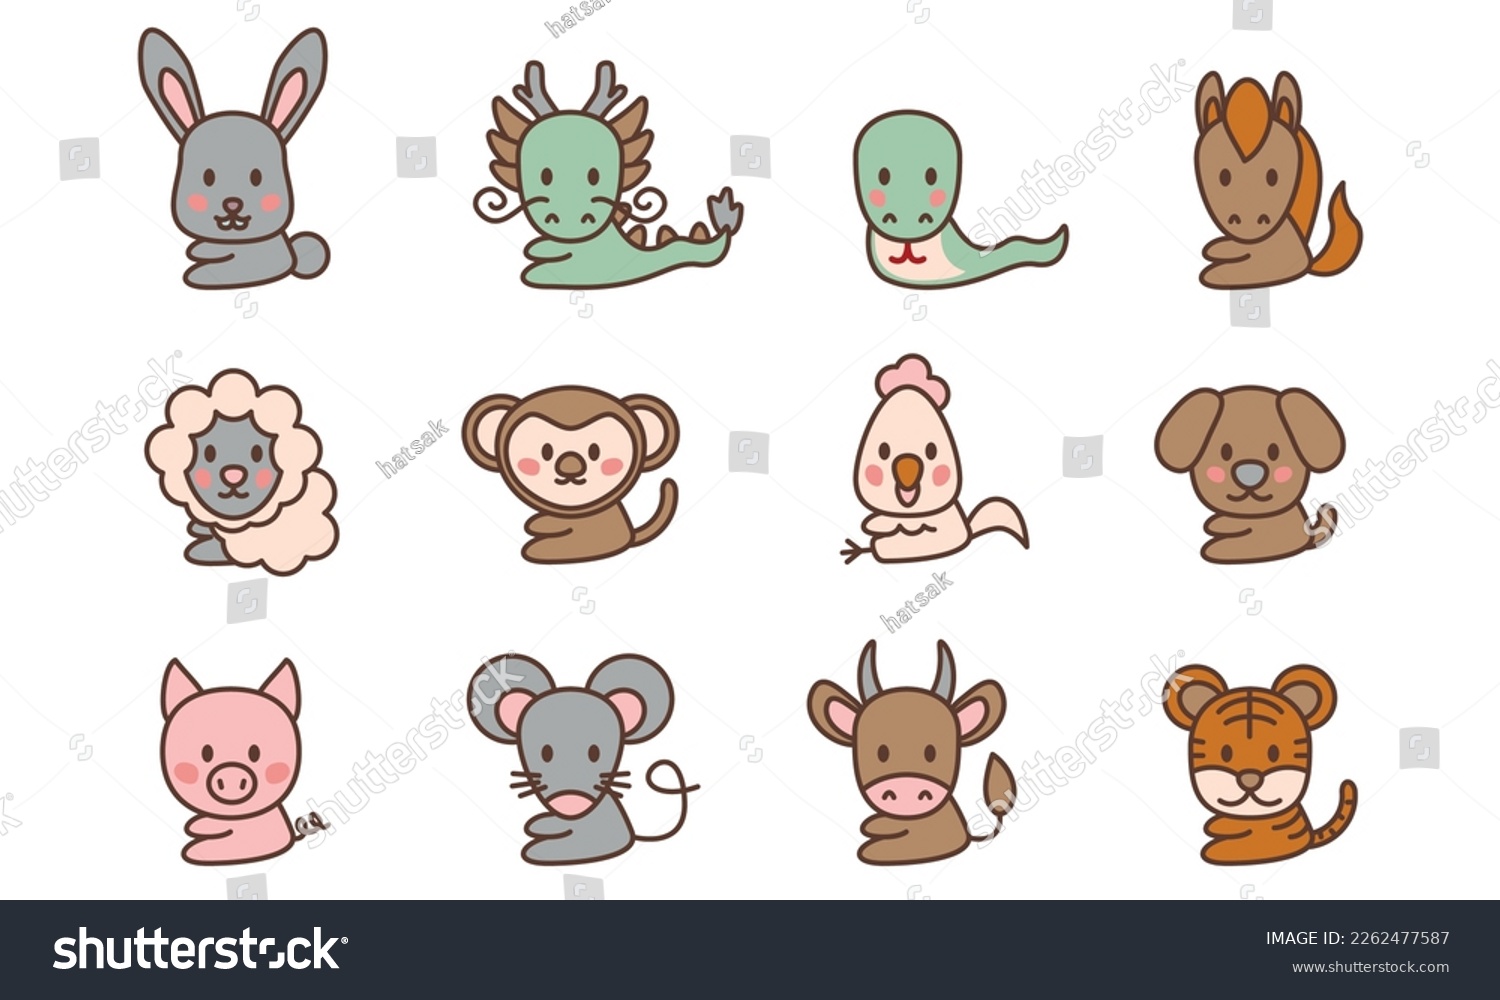 SVG of Chinese new year, zodiac signs icons and symbols. Vector illustration. Cartoon Chinese Zodiac Animals Icon. Rat, Ox, Tiger, Rabbit, Dragon, Snake, Horse, Sheep, Monkey, Rooster, Dog, Pig svg